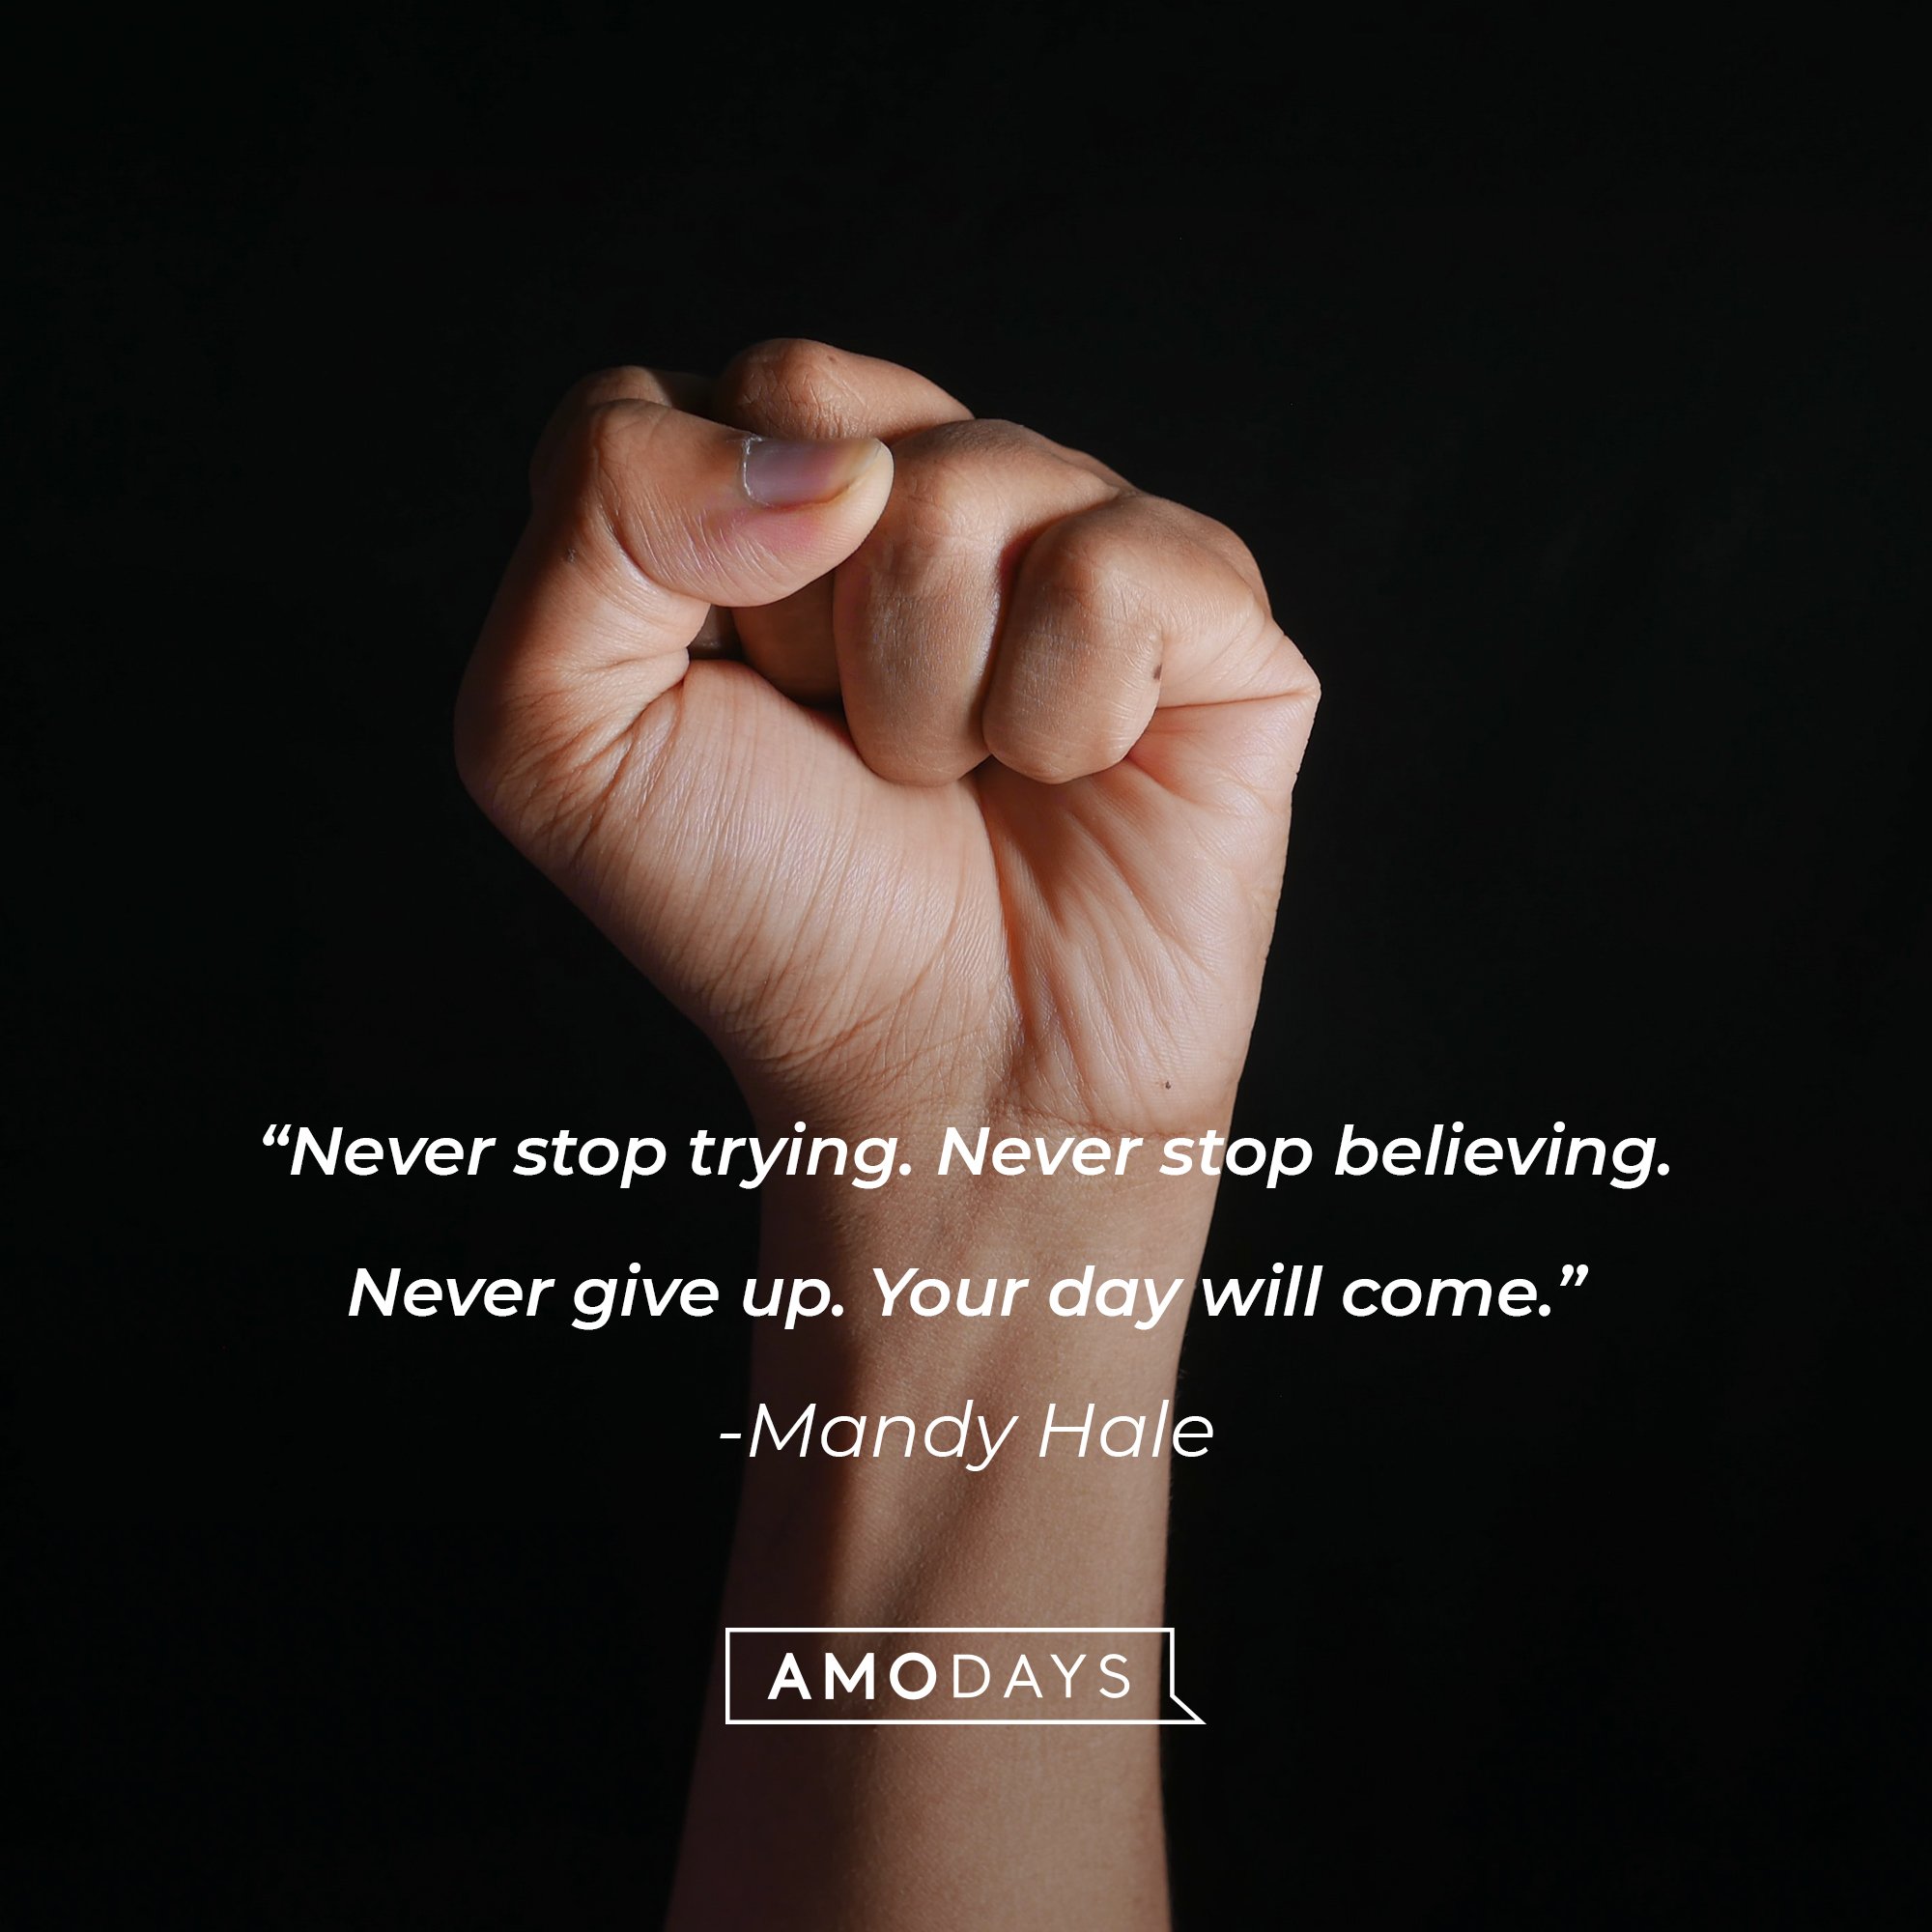 Mandy Hale's quote: "Never stop trying. Never stop believing. Never give up. Your day will come." | Image: AmoDays